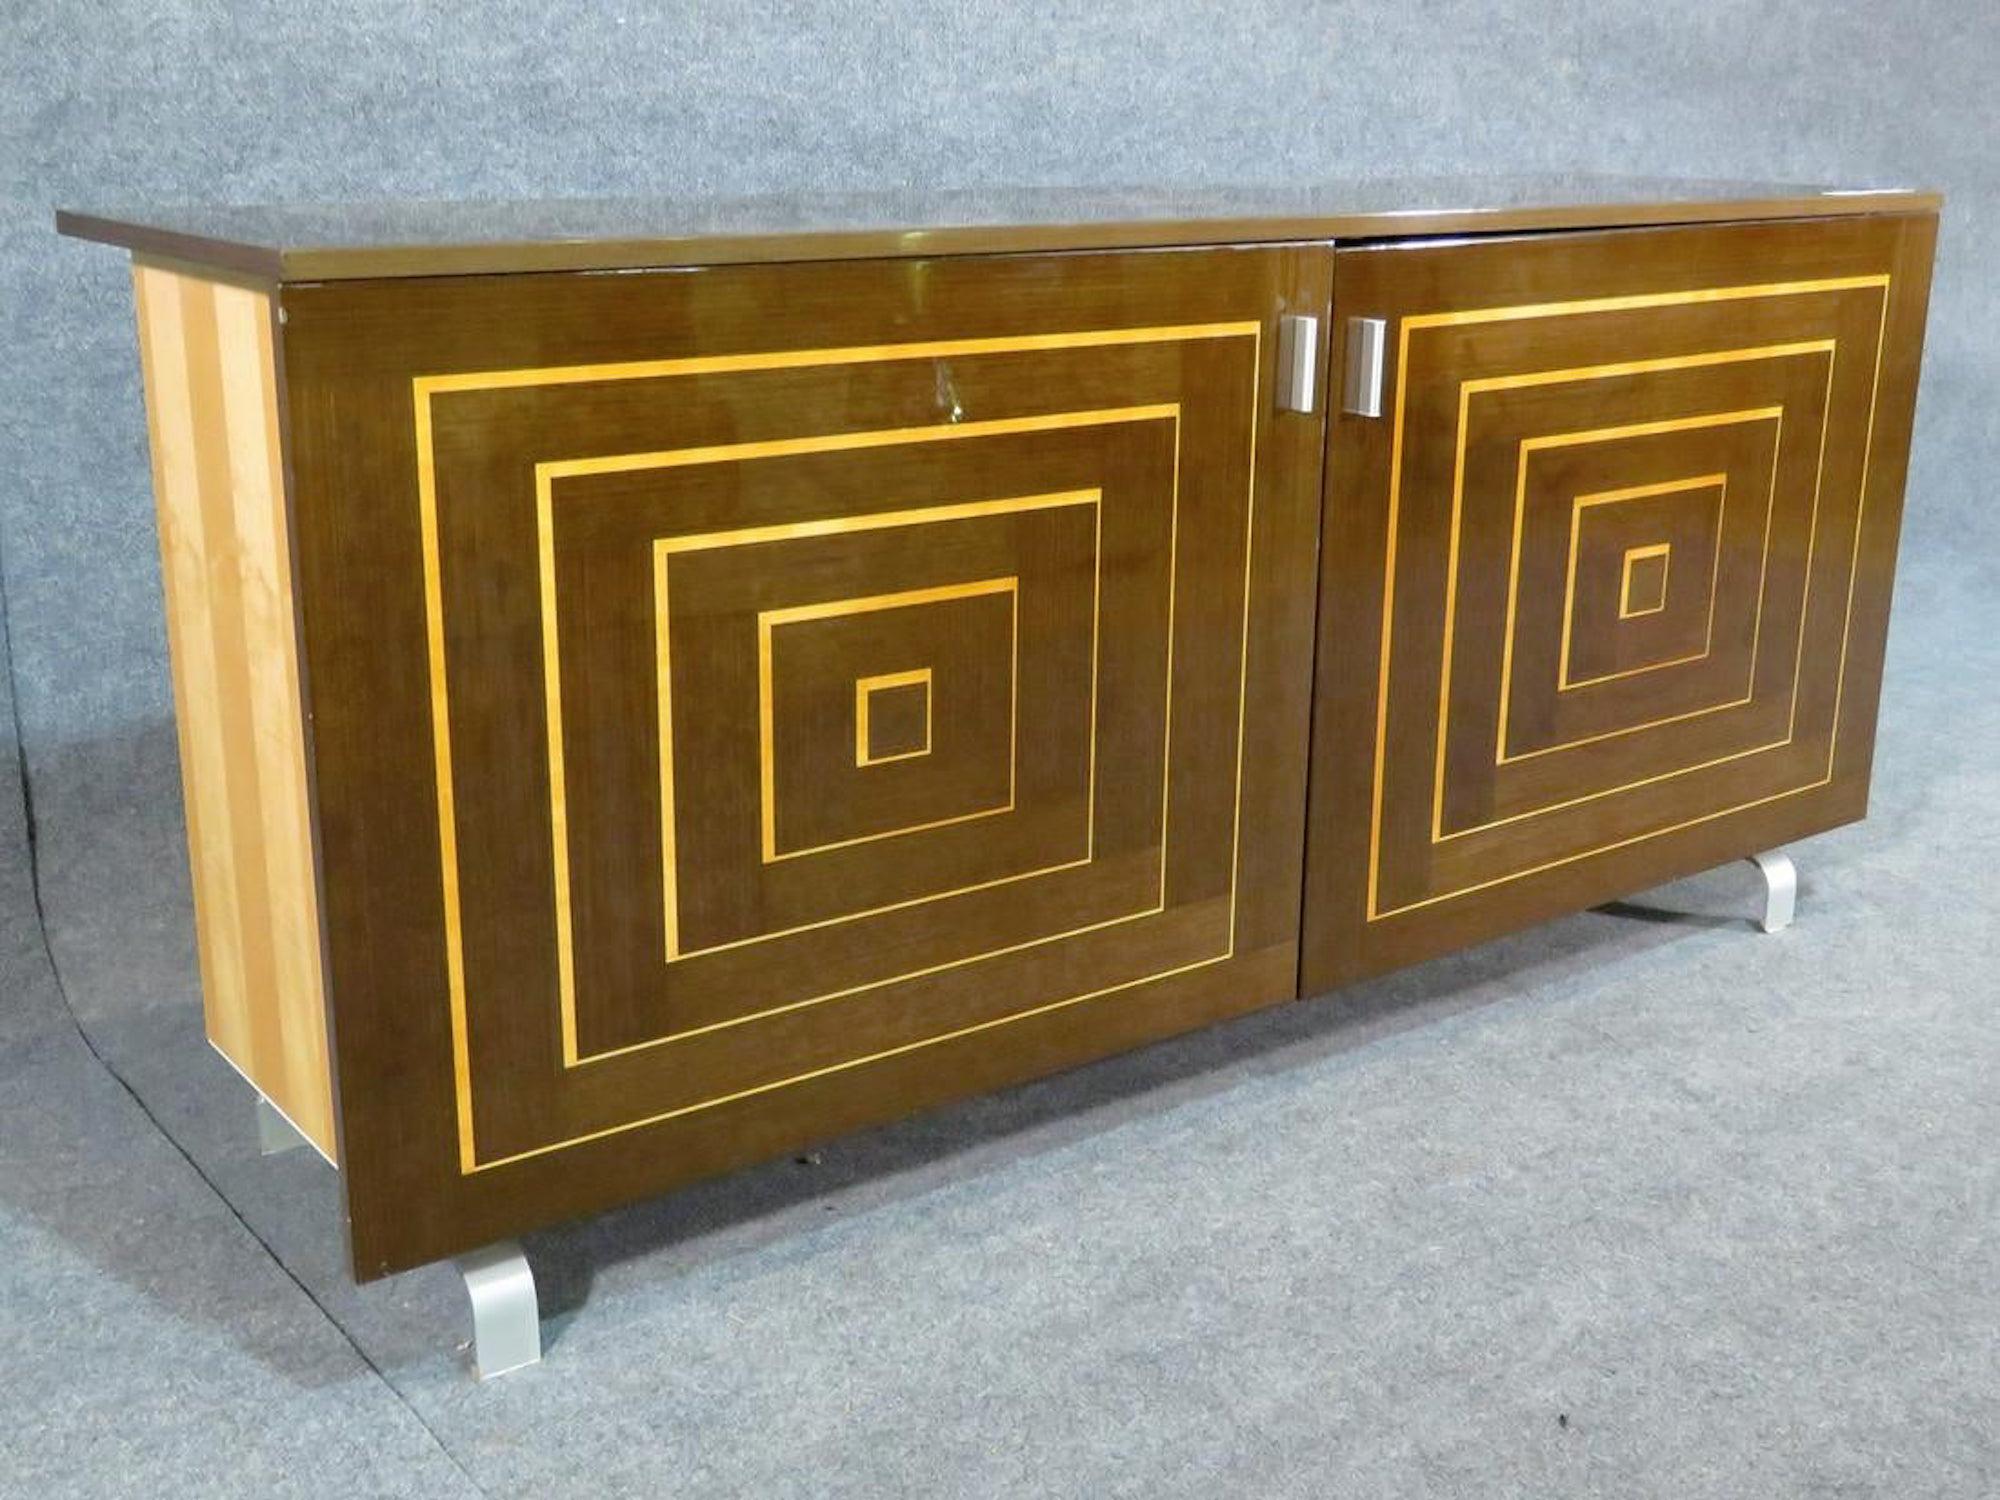 Italian style sideboard cabinet with inlay wood and two cabinets with shelves.
(Please confirm item location - NY or NJ - with dealer).
 